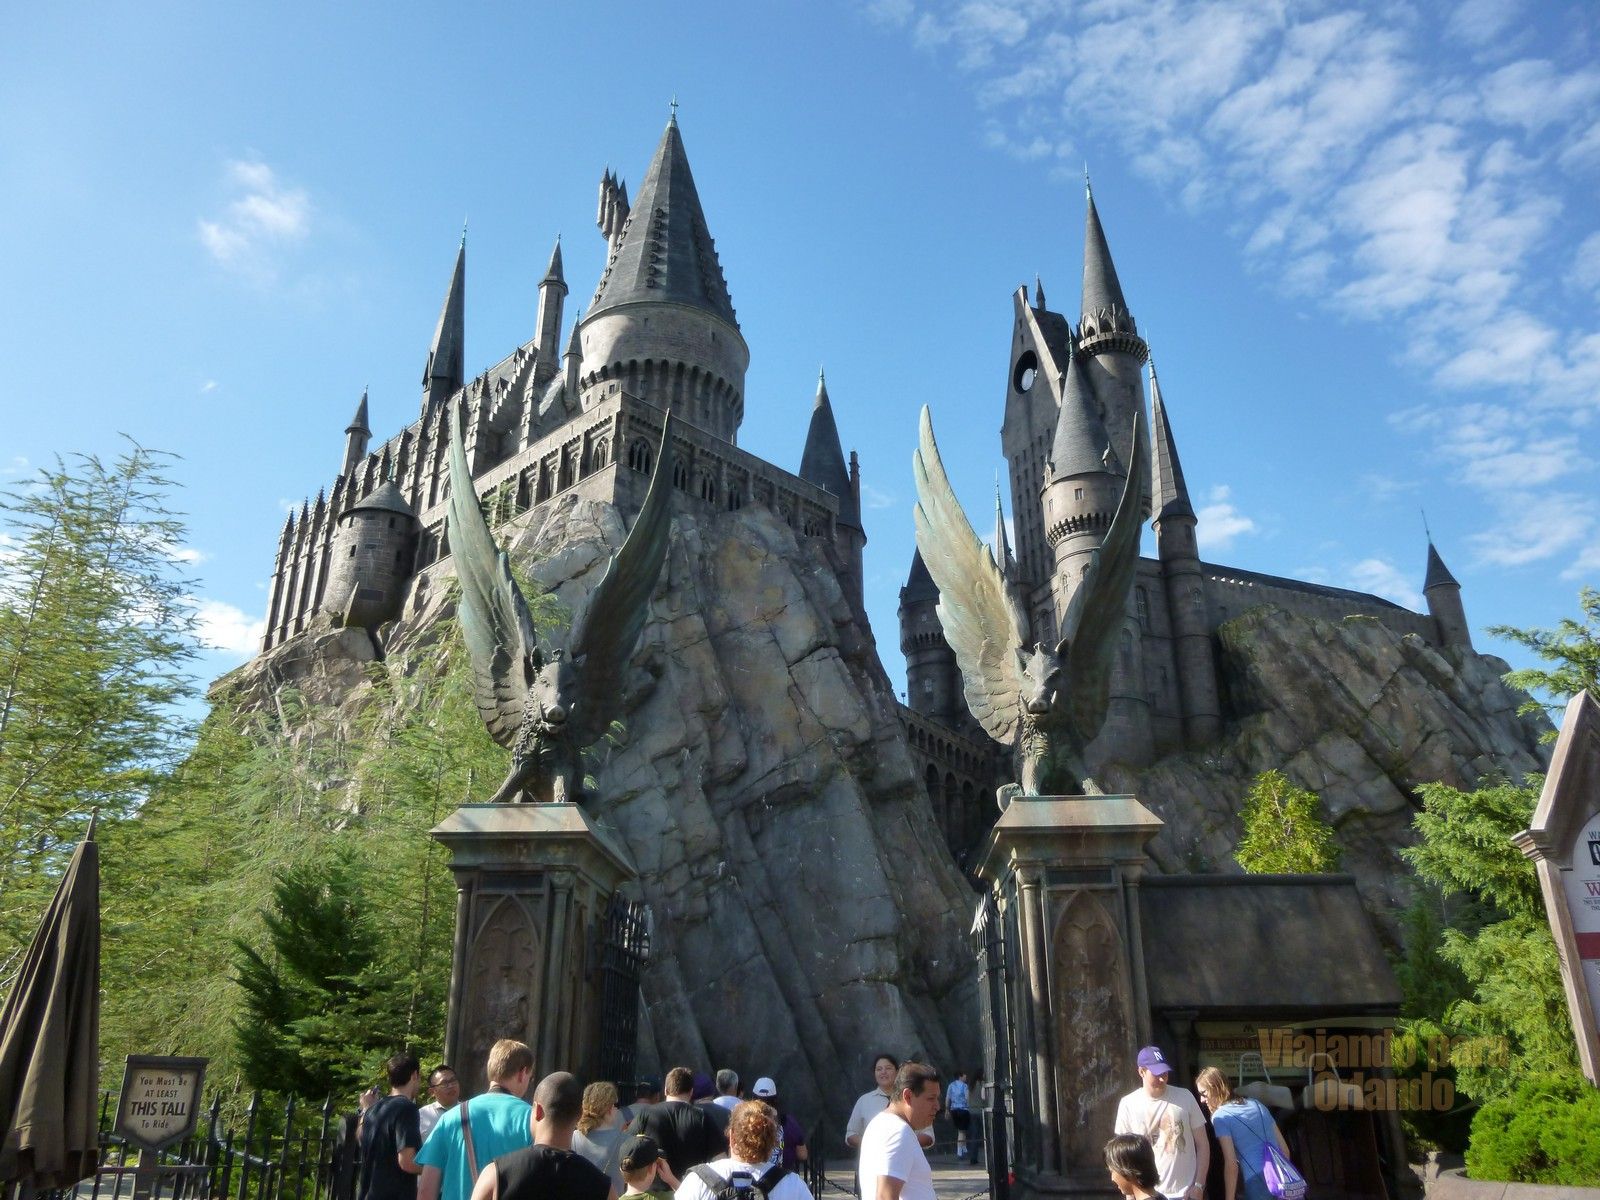 Harry Potter and the Forbidden Journey at Universal's Islands of